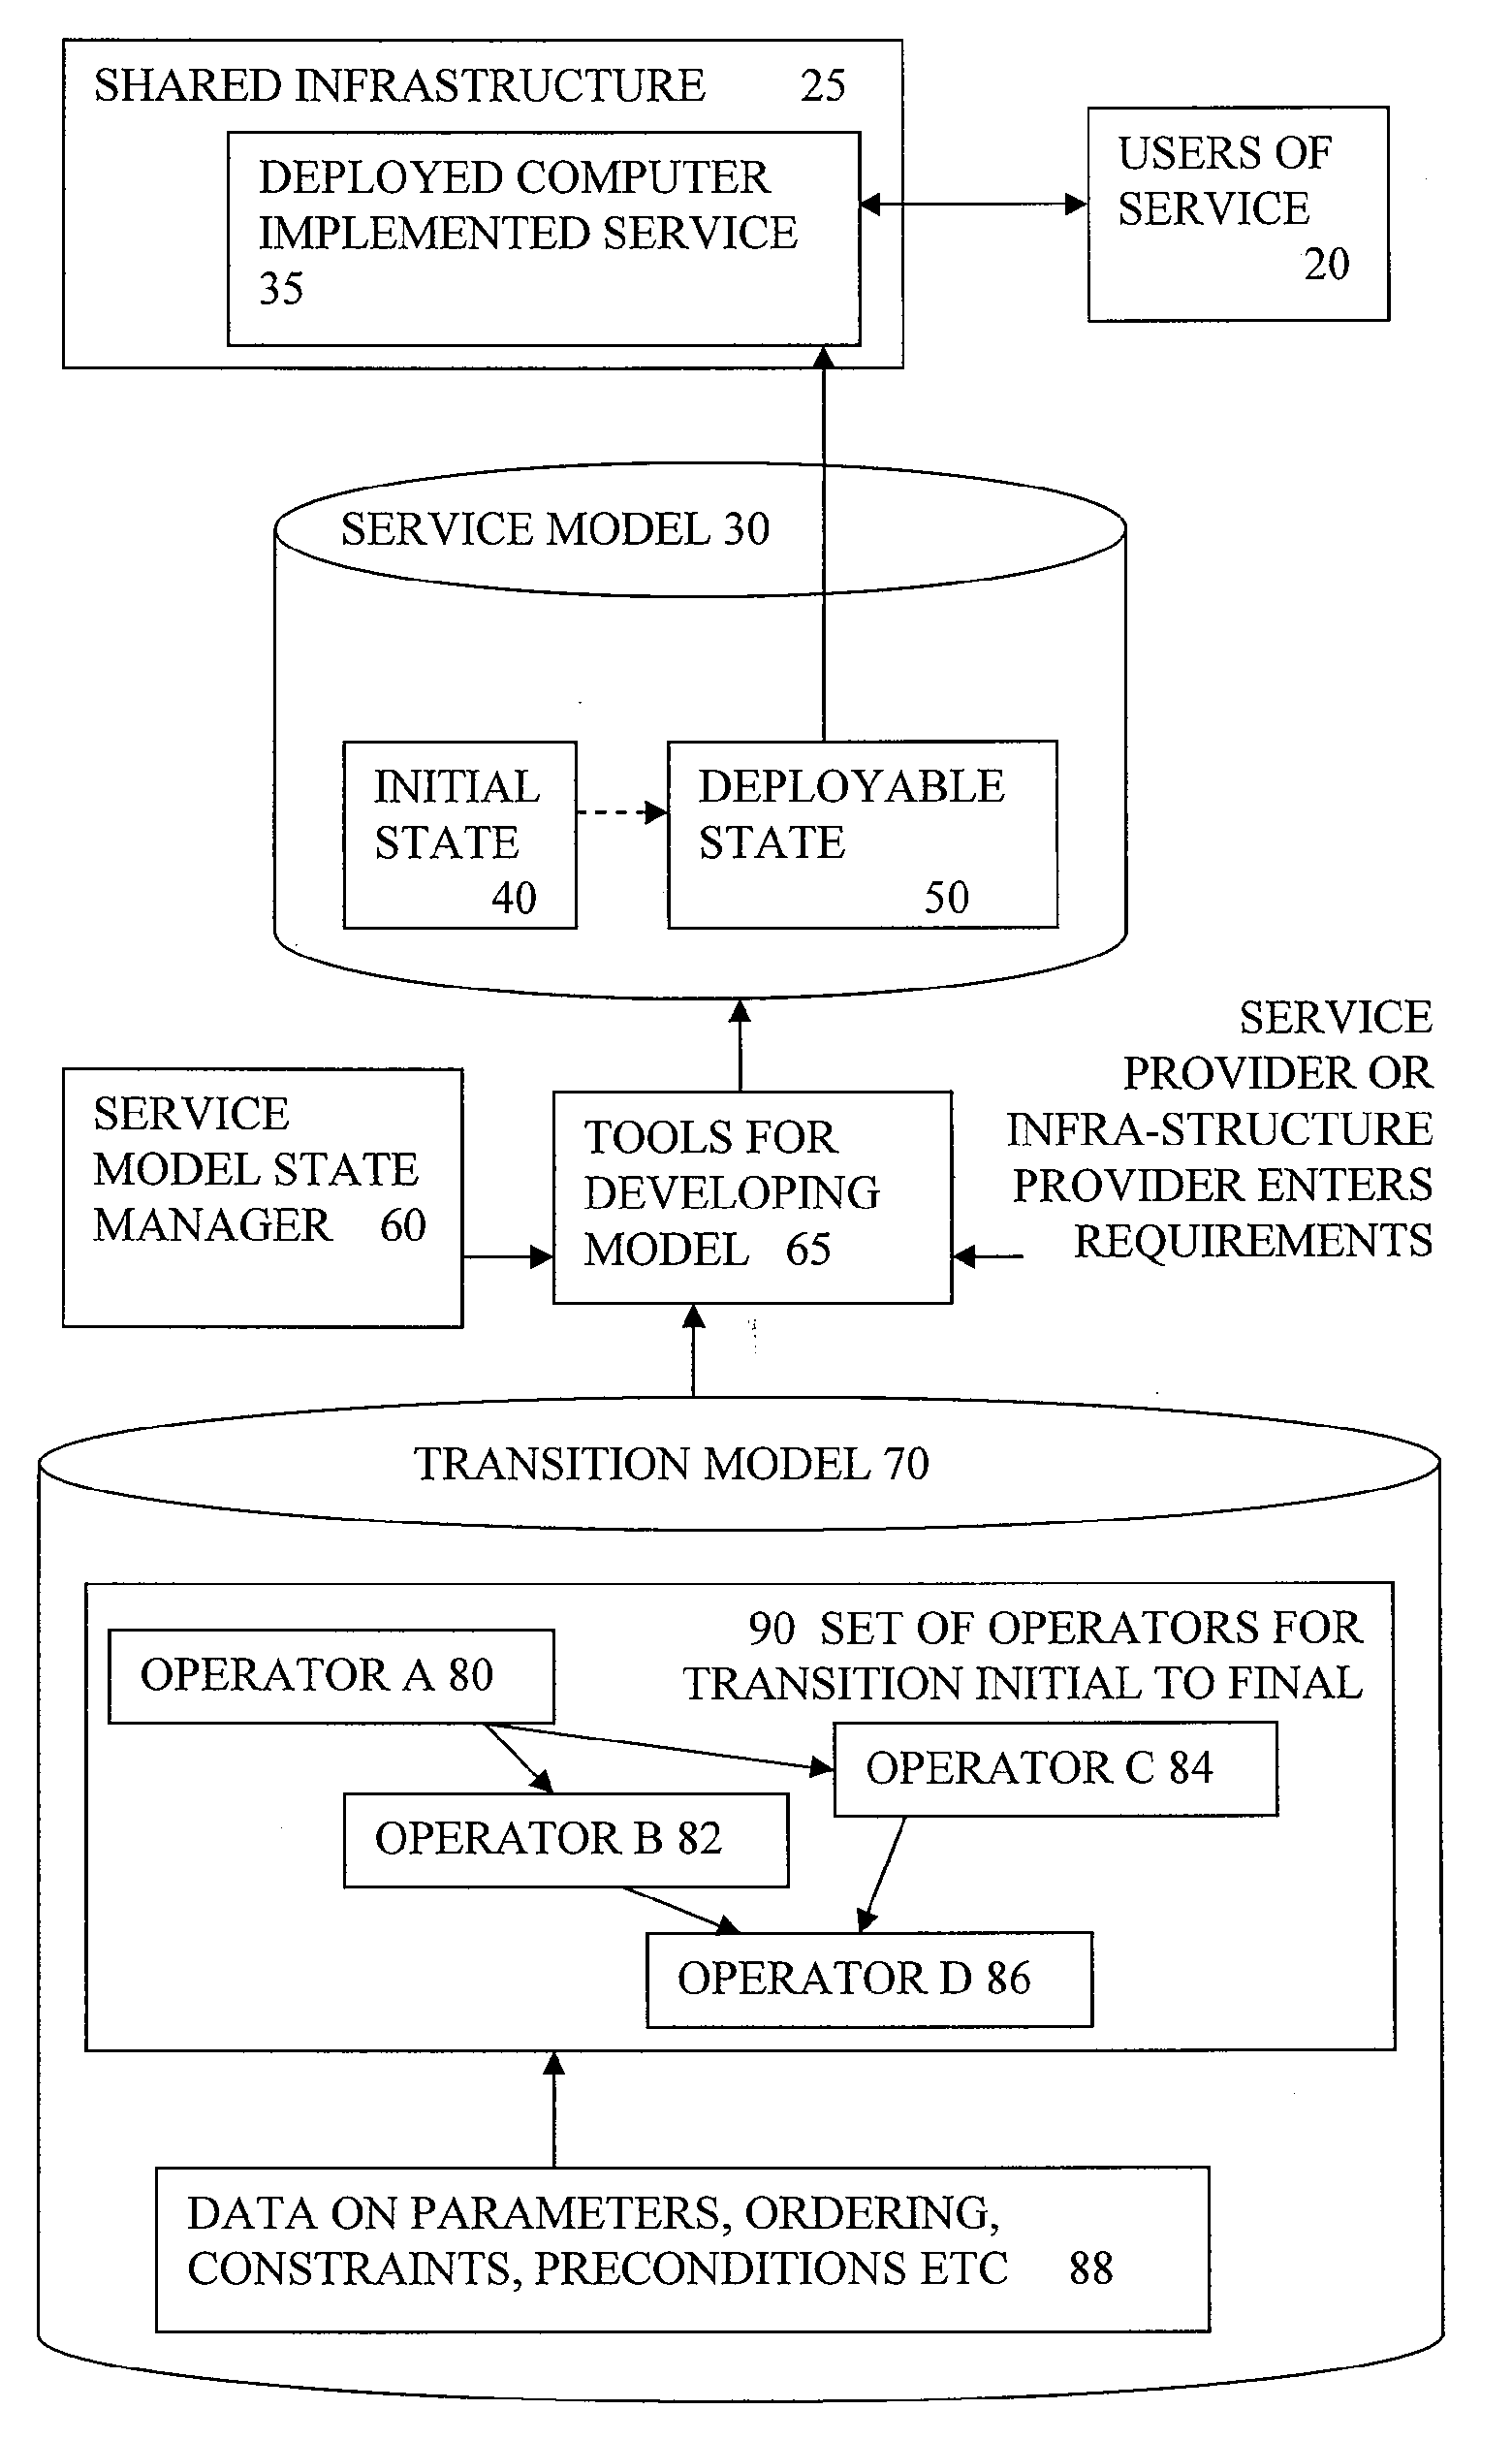 Automated Lifecycle Management of a Computer Implemented Service